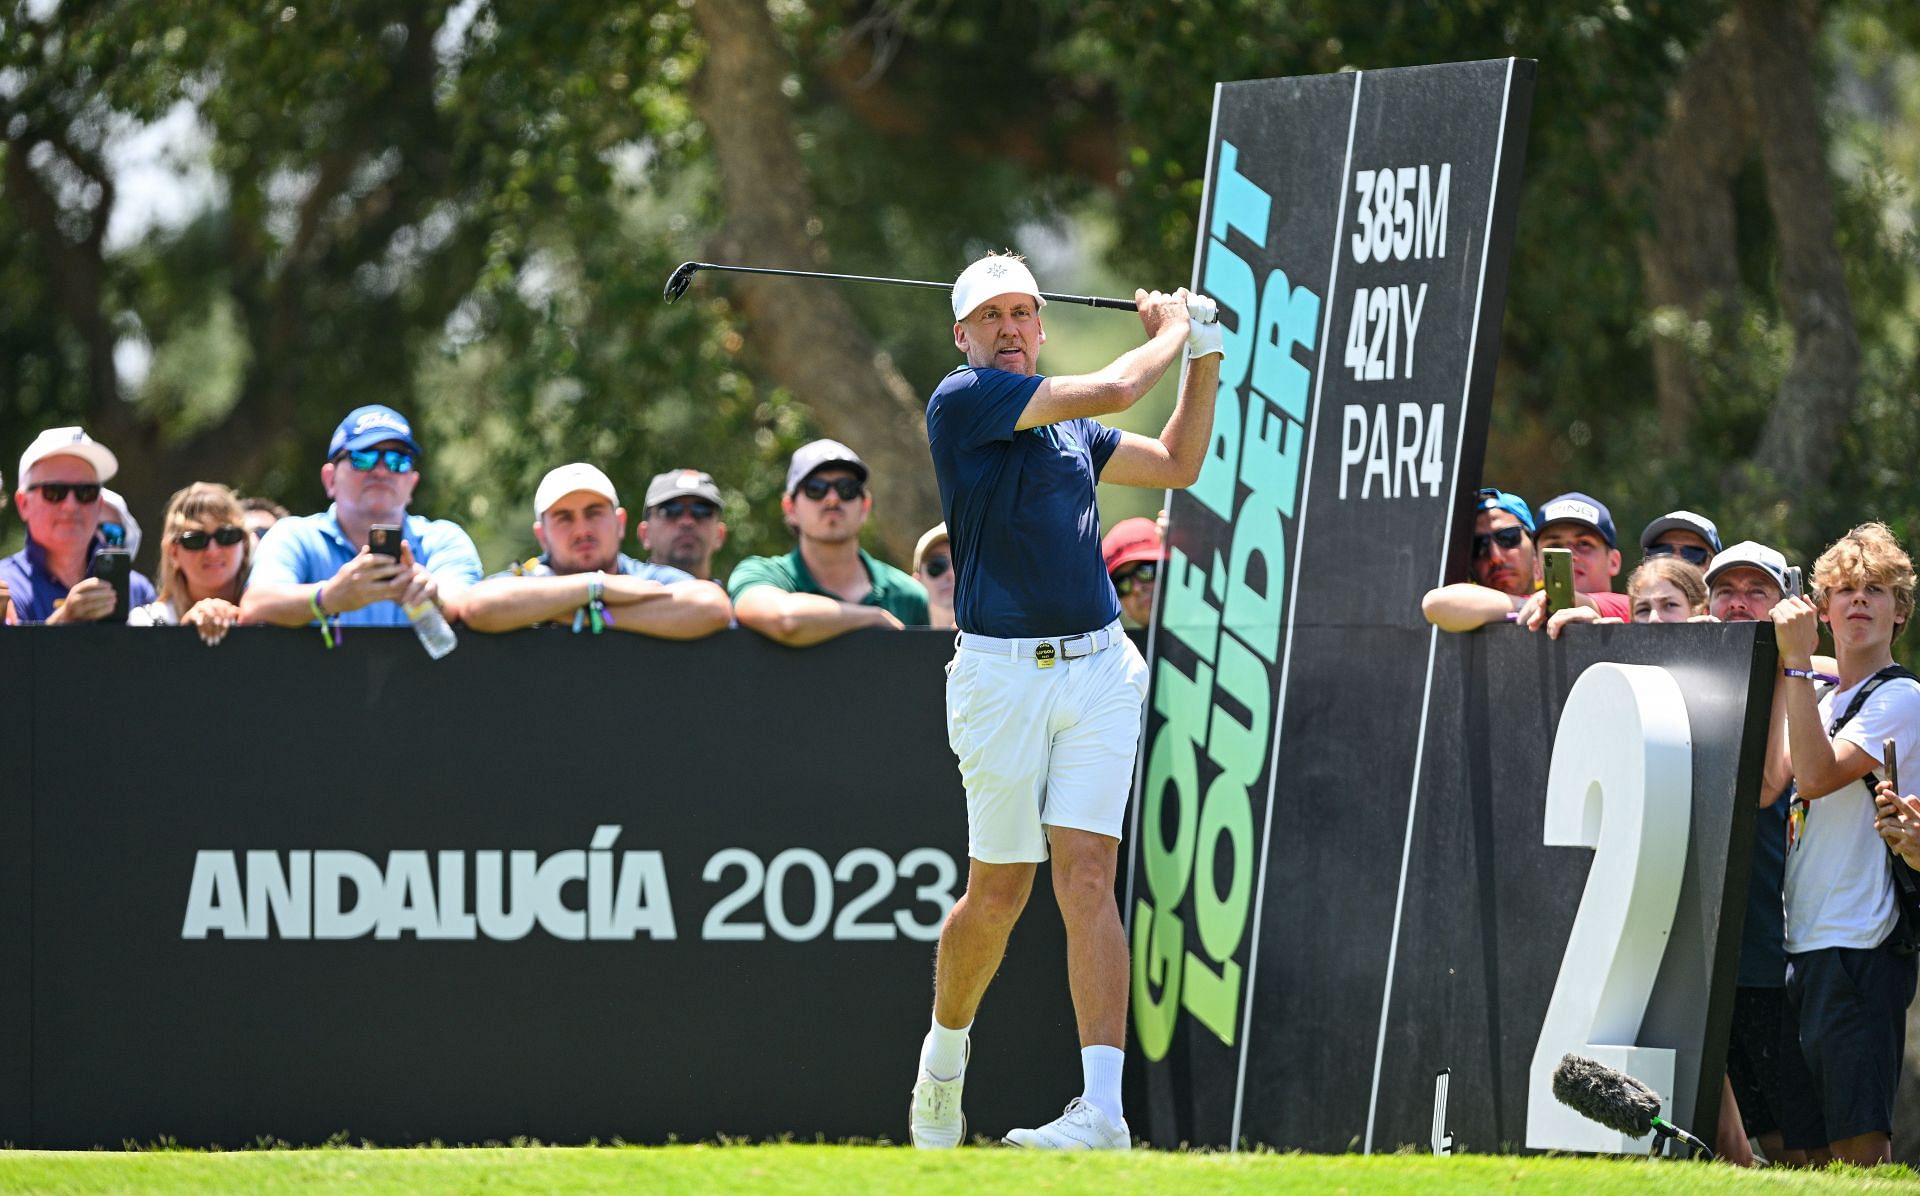 Ian Poulter at the LIV Golf Andalucia (via Getty images)